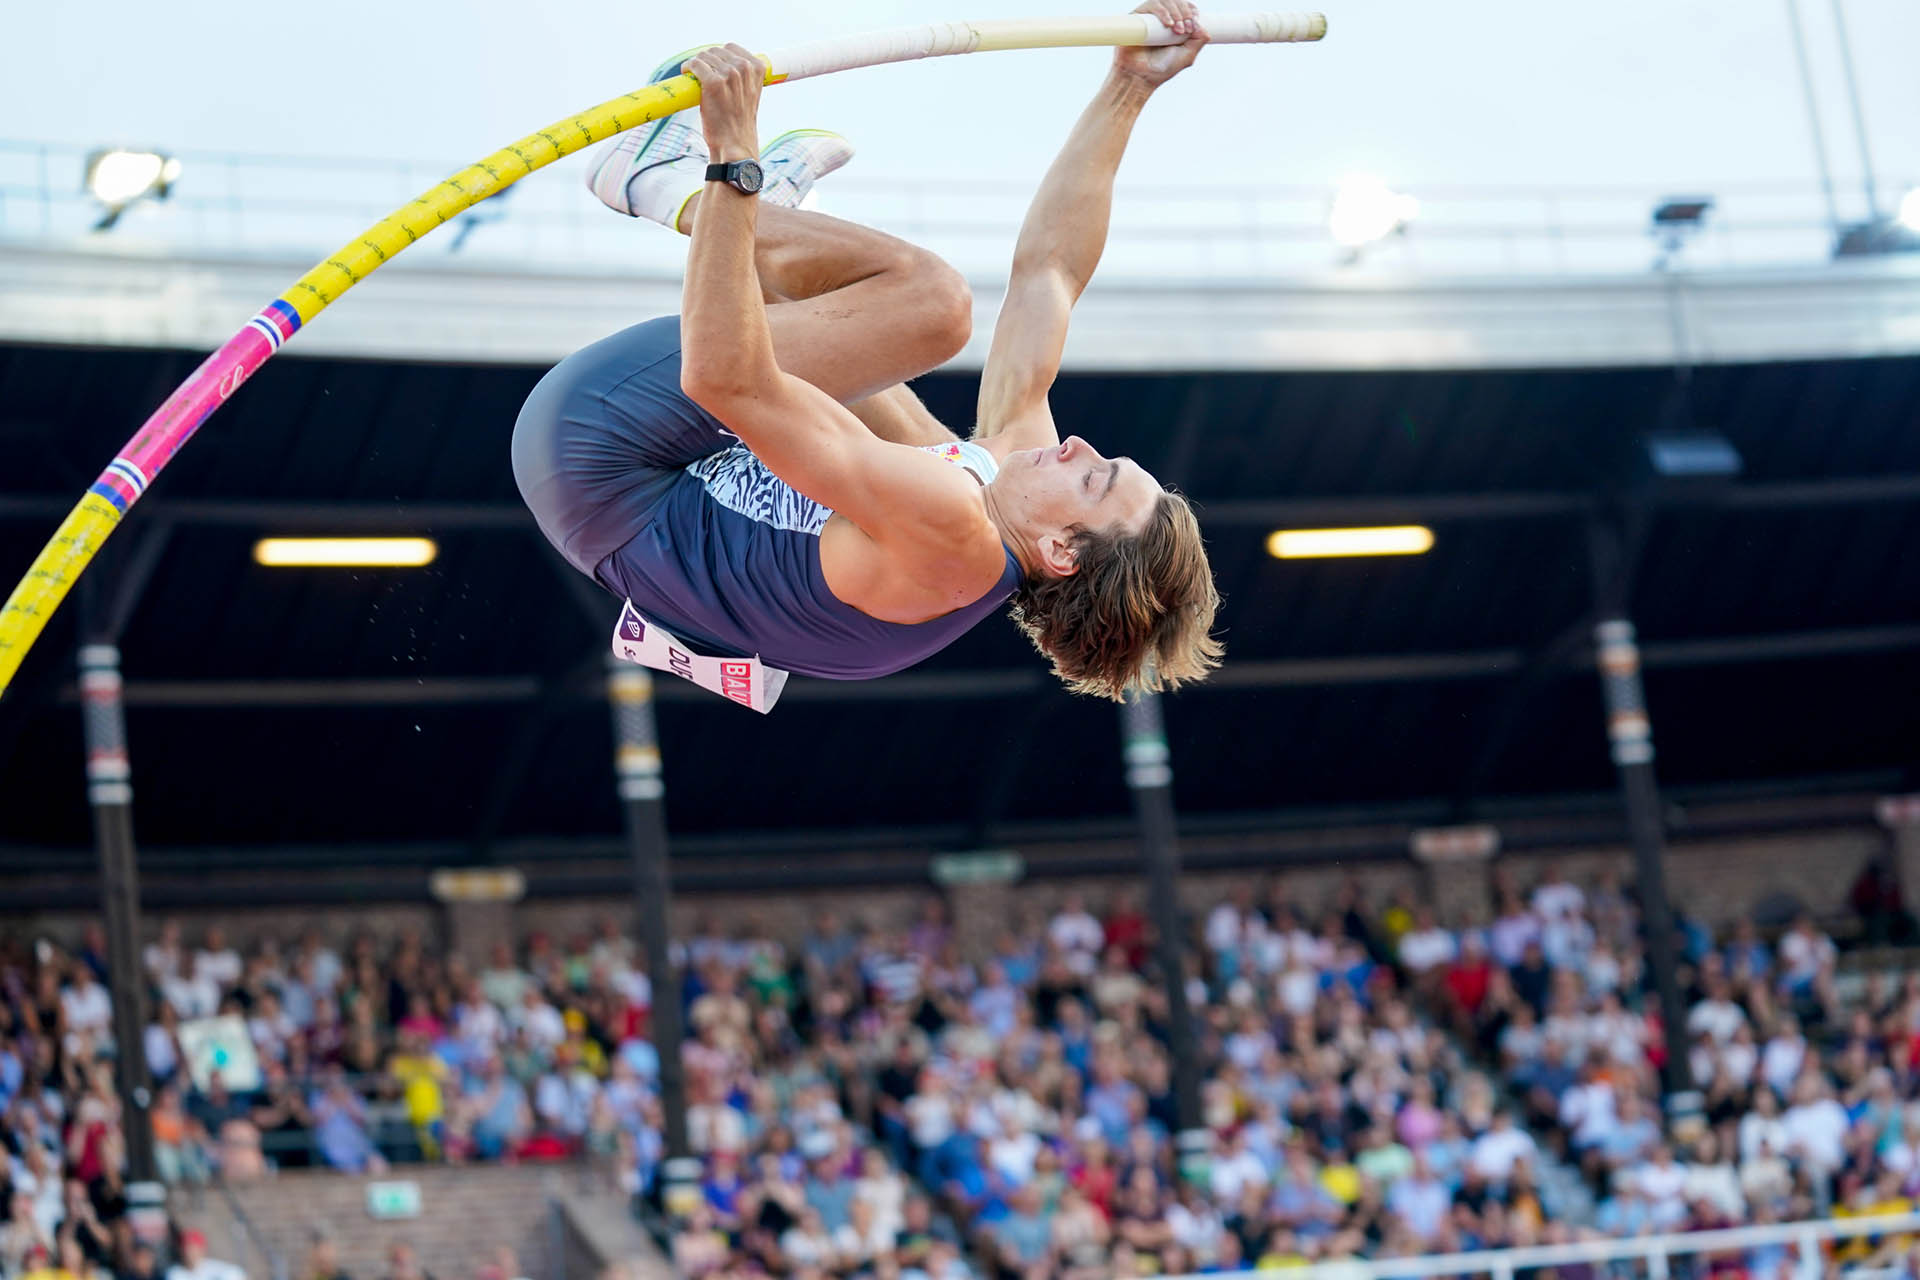 “Mondo” Duplantis soars to new outdoor World Record, at home, in Stockholm